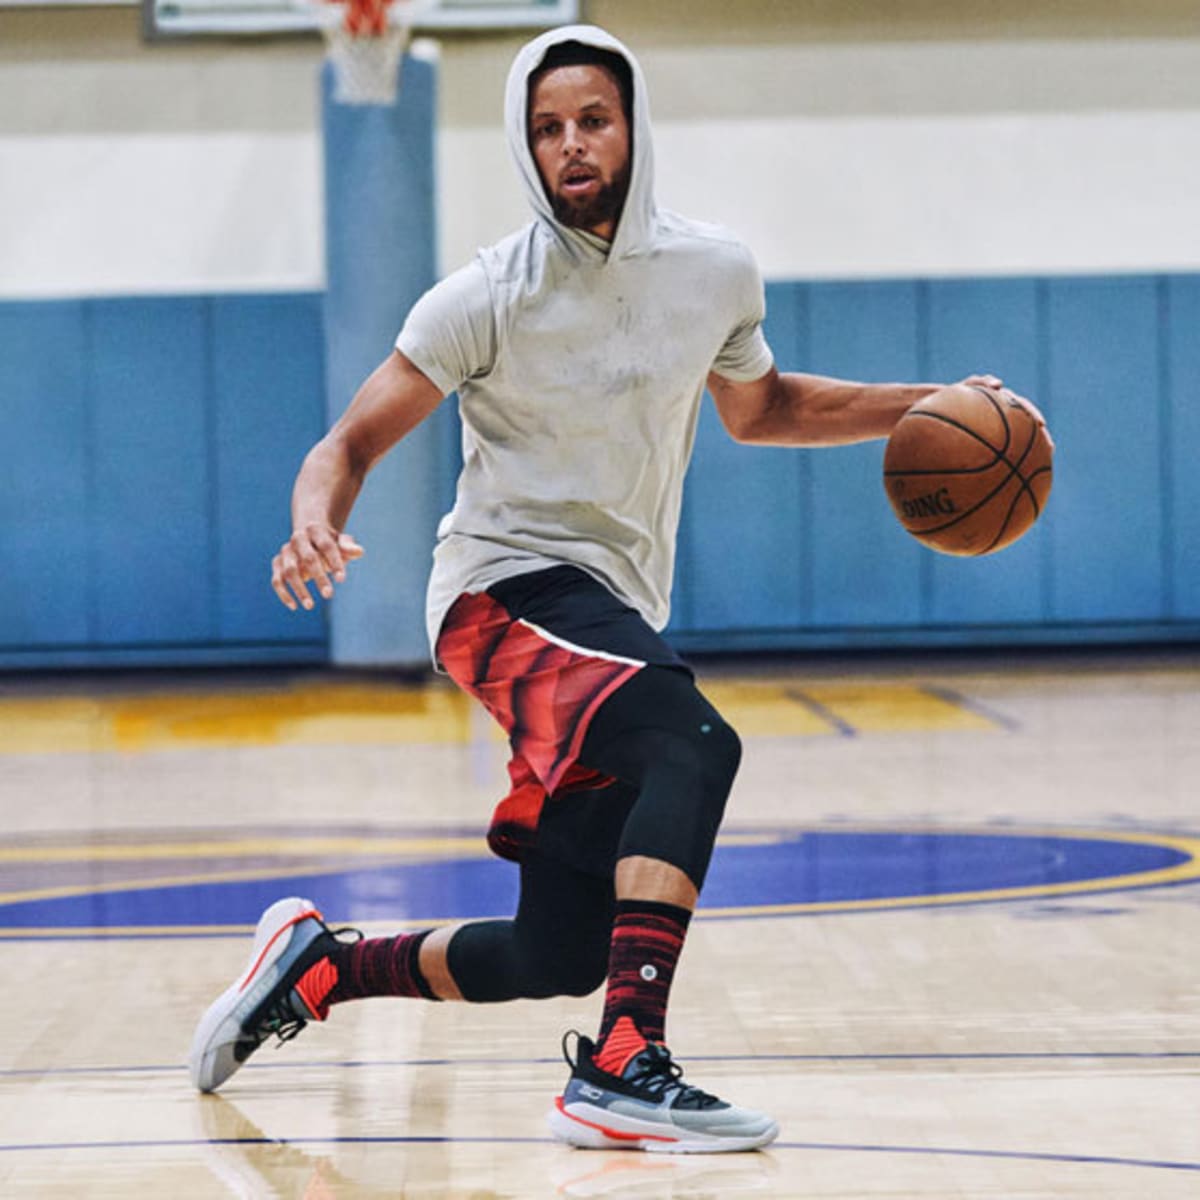 Steph Curry gets his own brand with Under Armour - Basketball